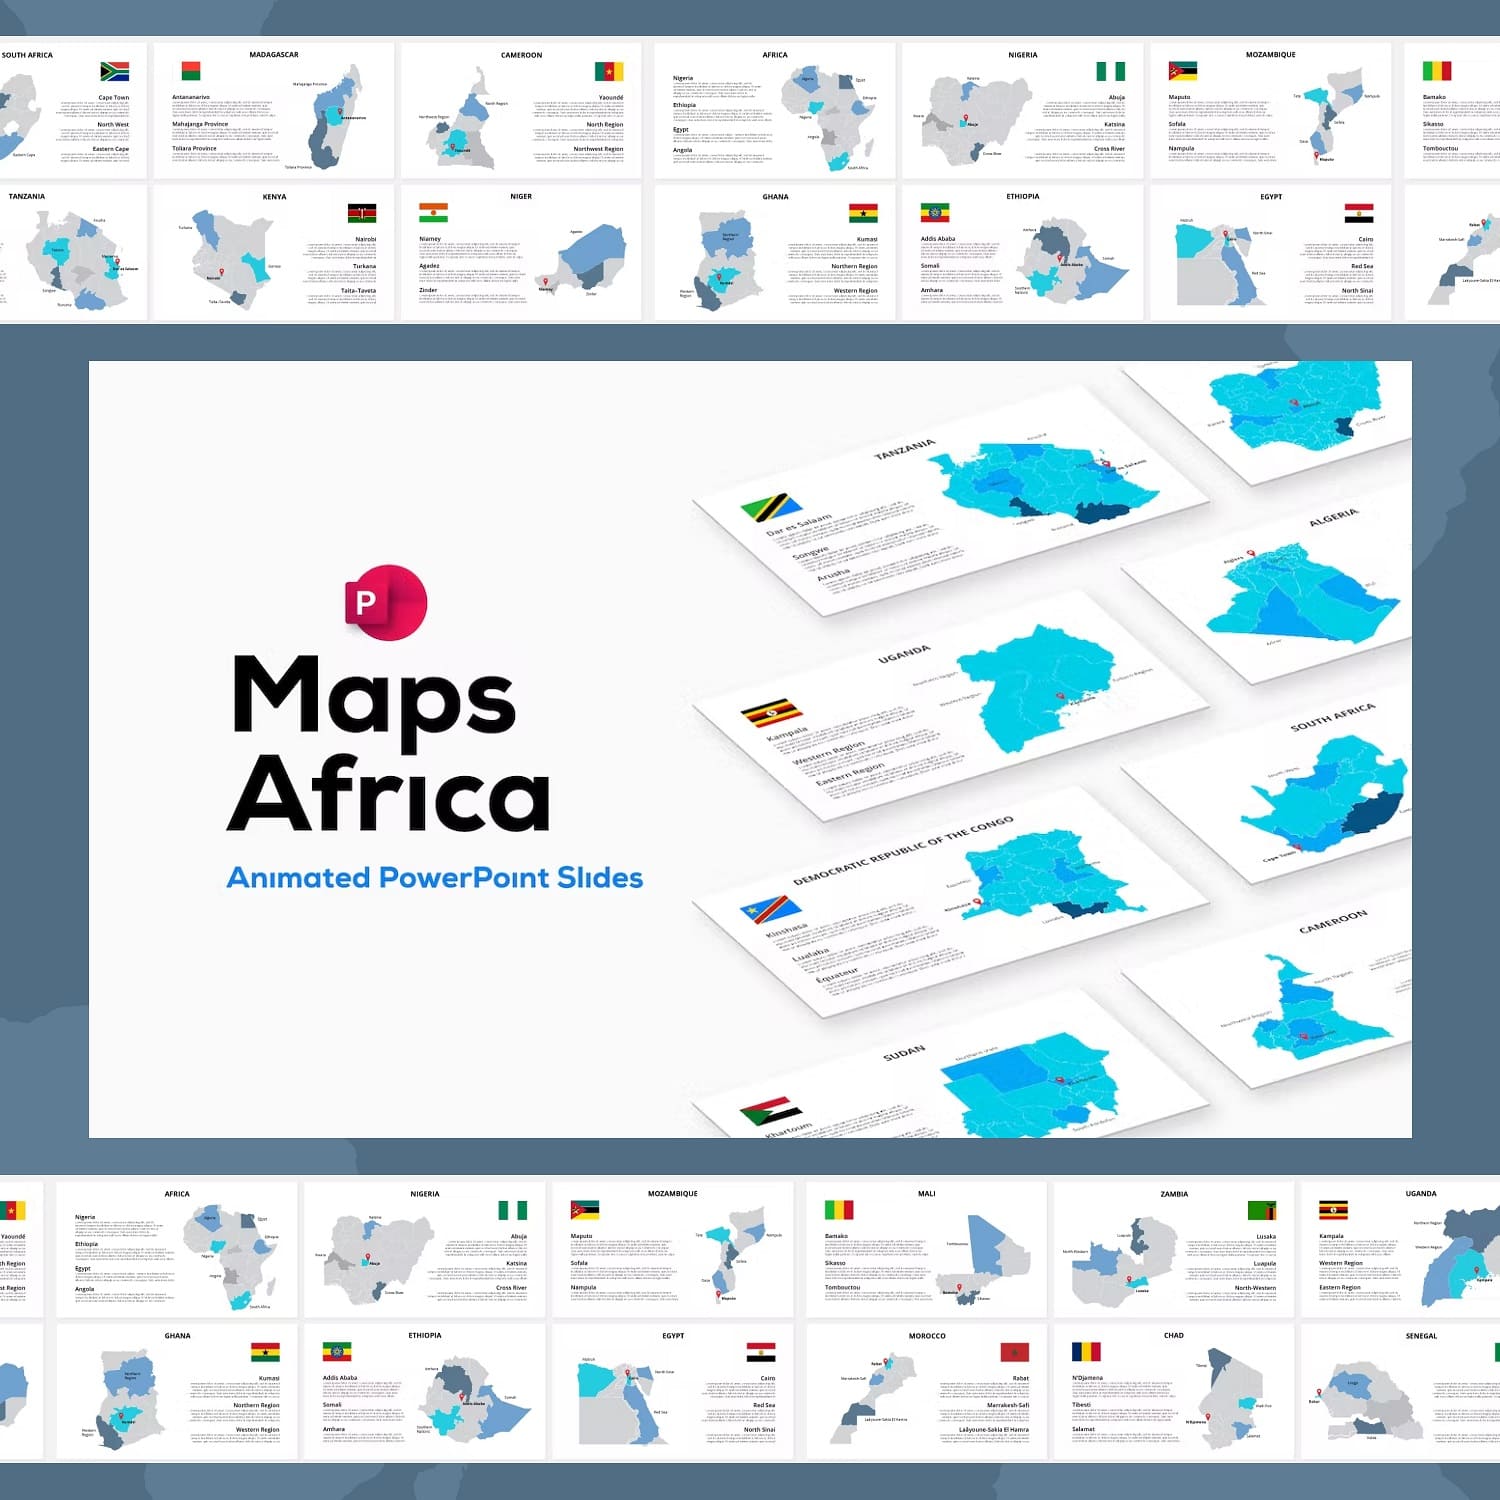 Animated slides for maps Africa.